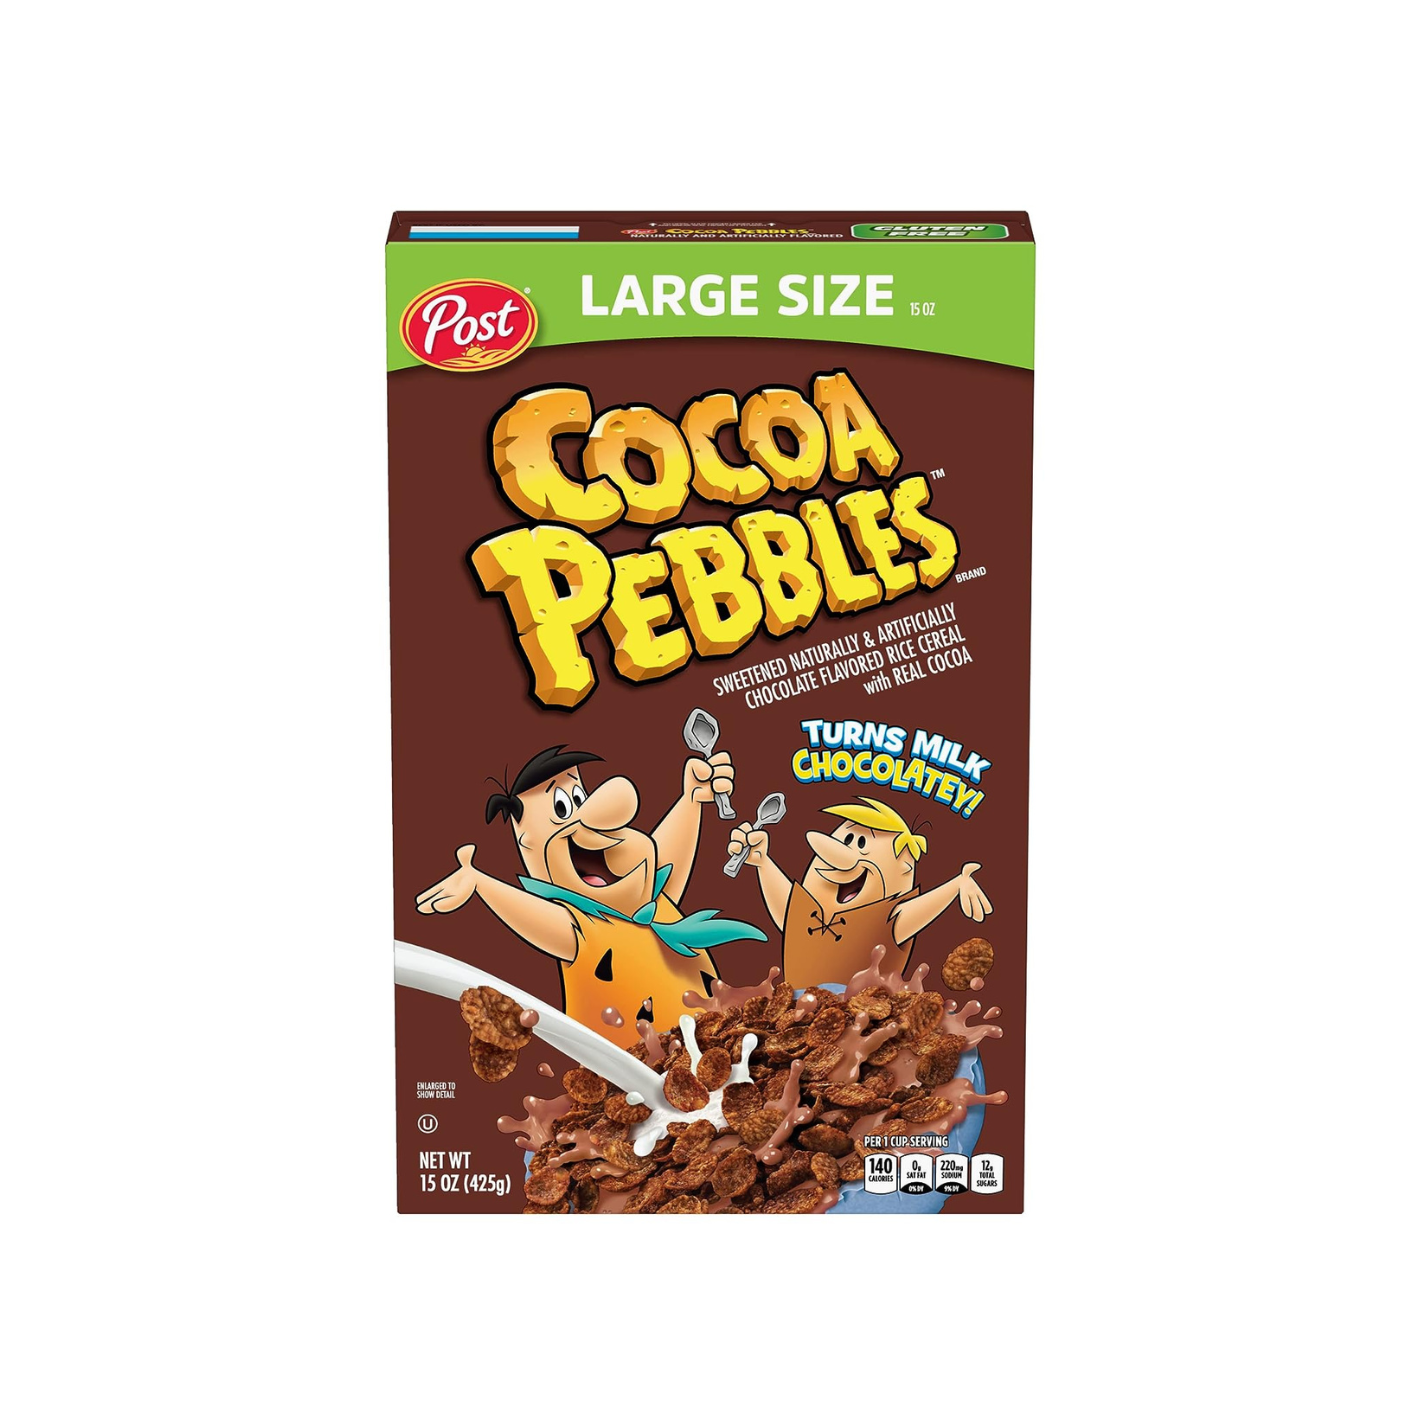 Large Size Box of Post Cocoa Pebbles Cereal (15-Oz)